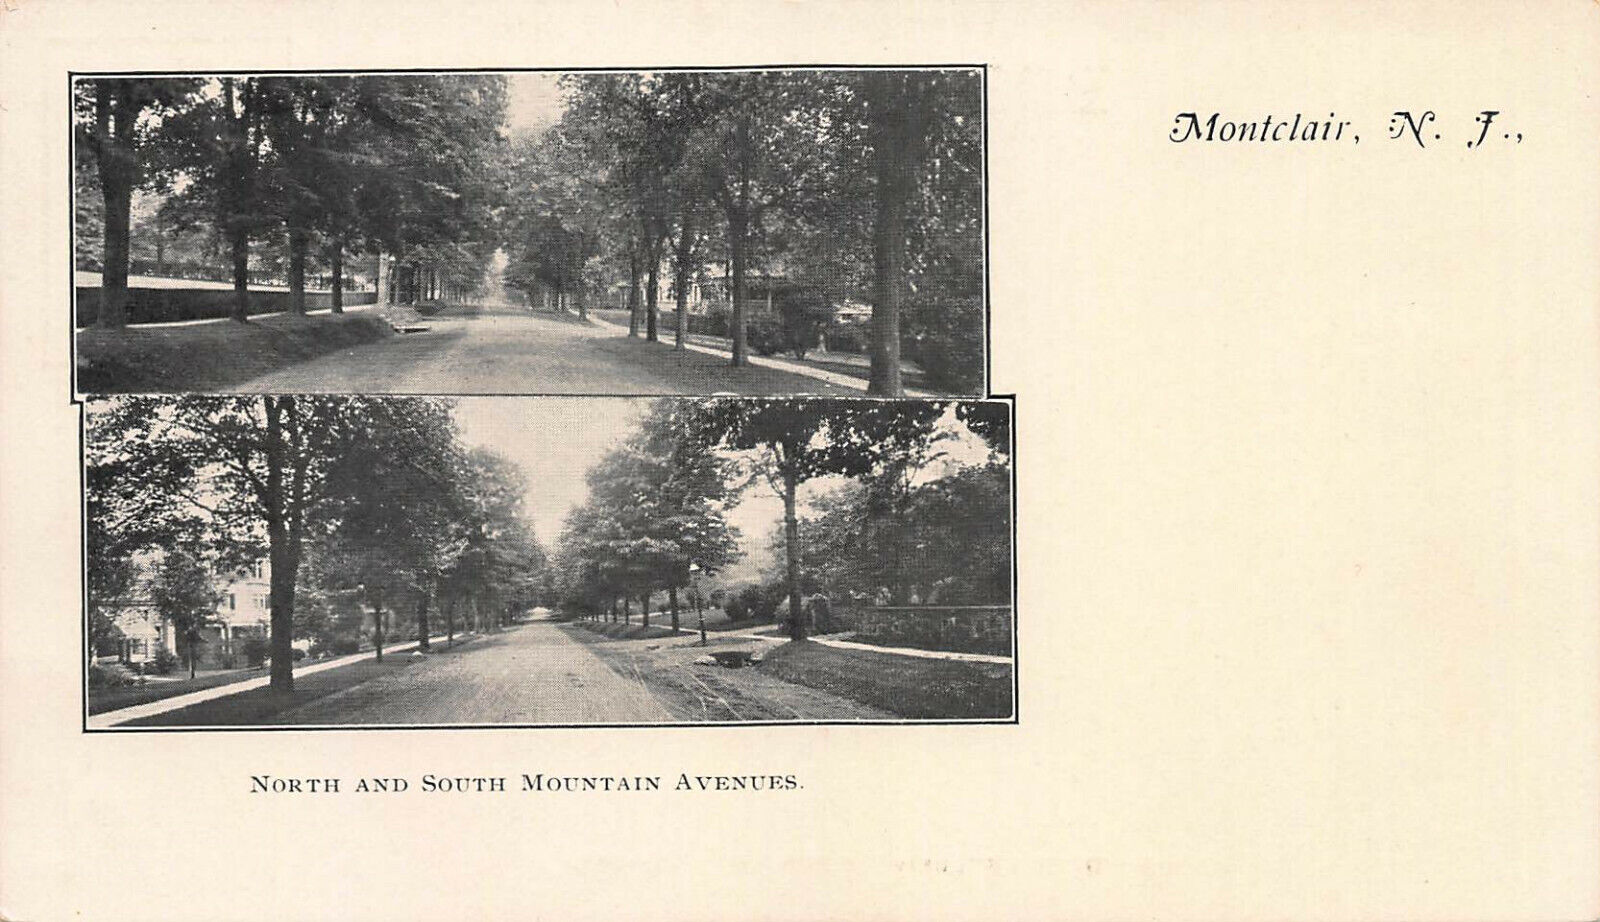 North and South Mountain Avenues, Montclair, N.J., Very Early Postcard, Unused